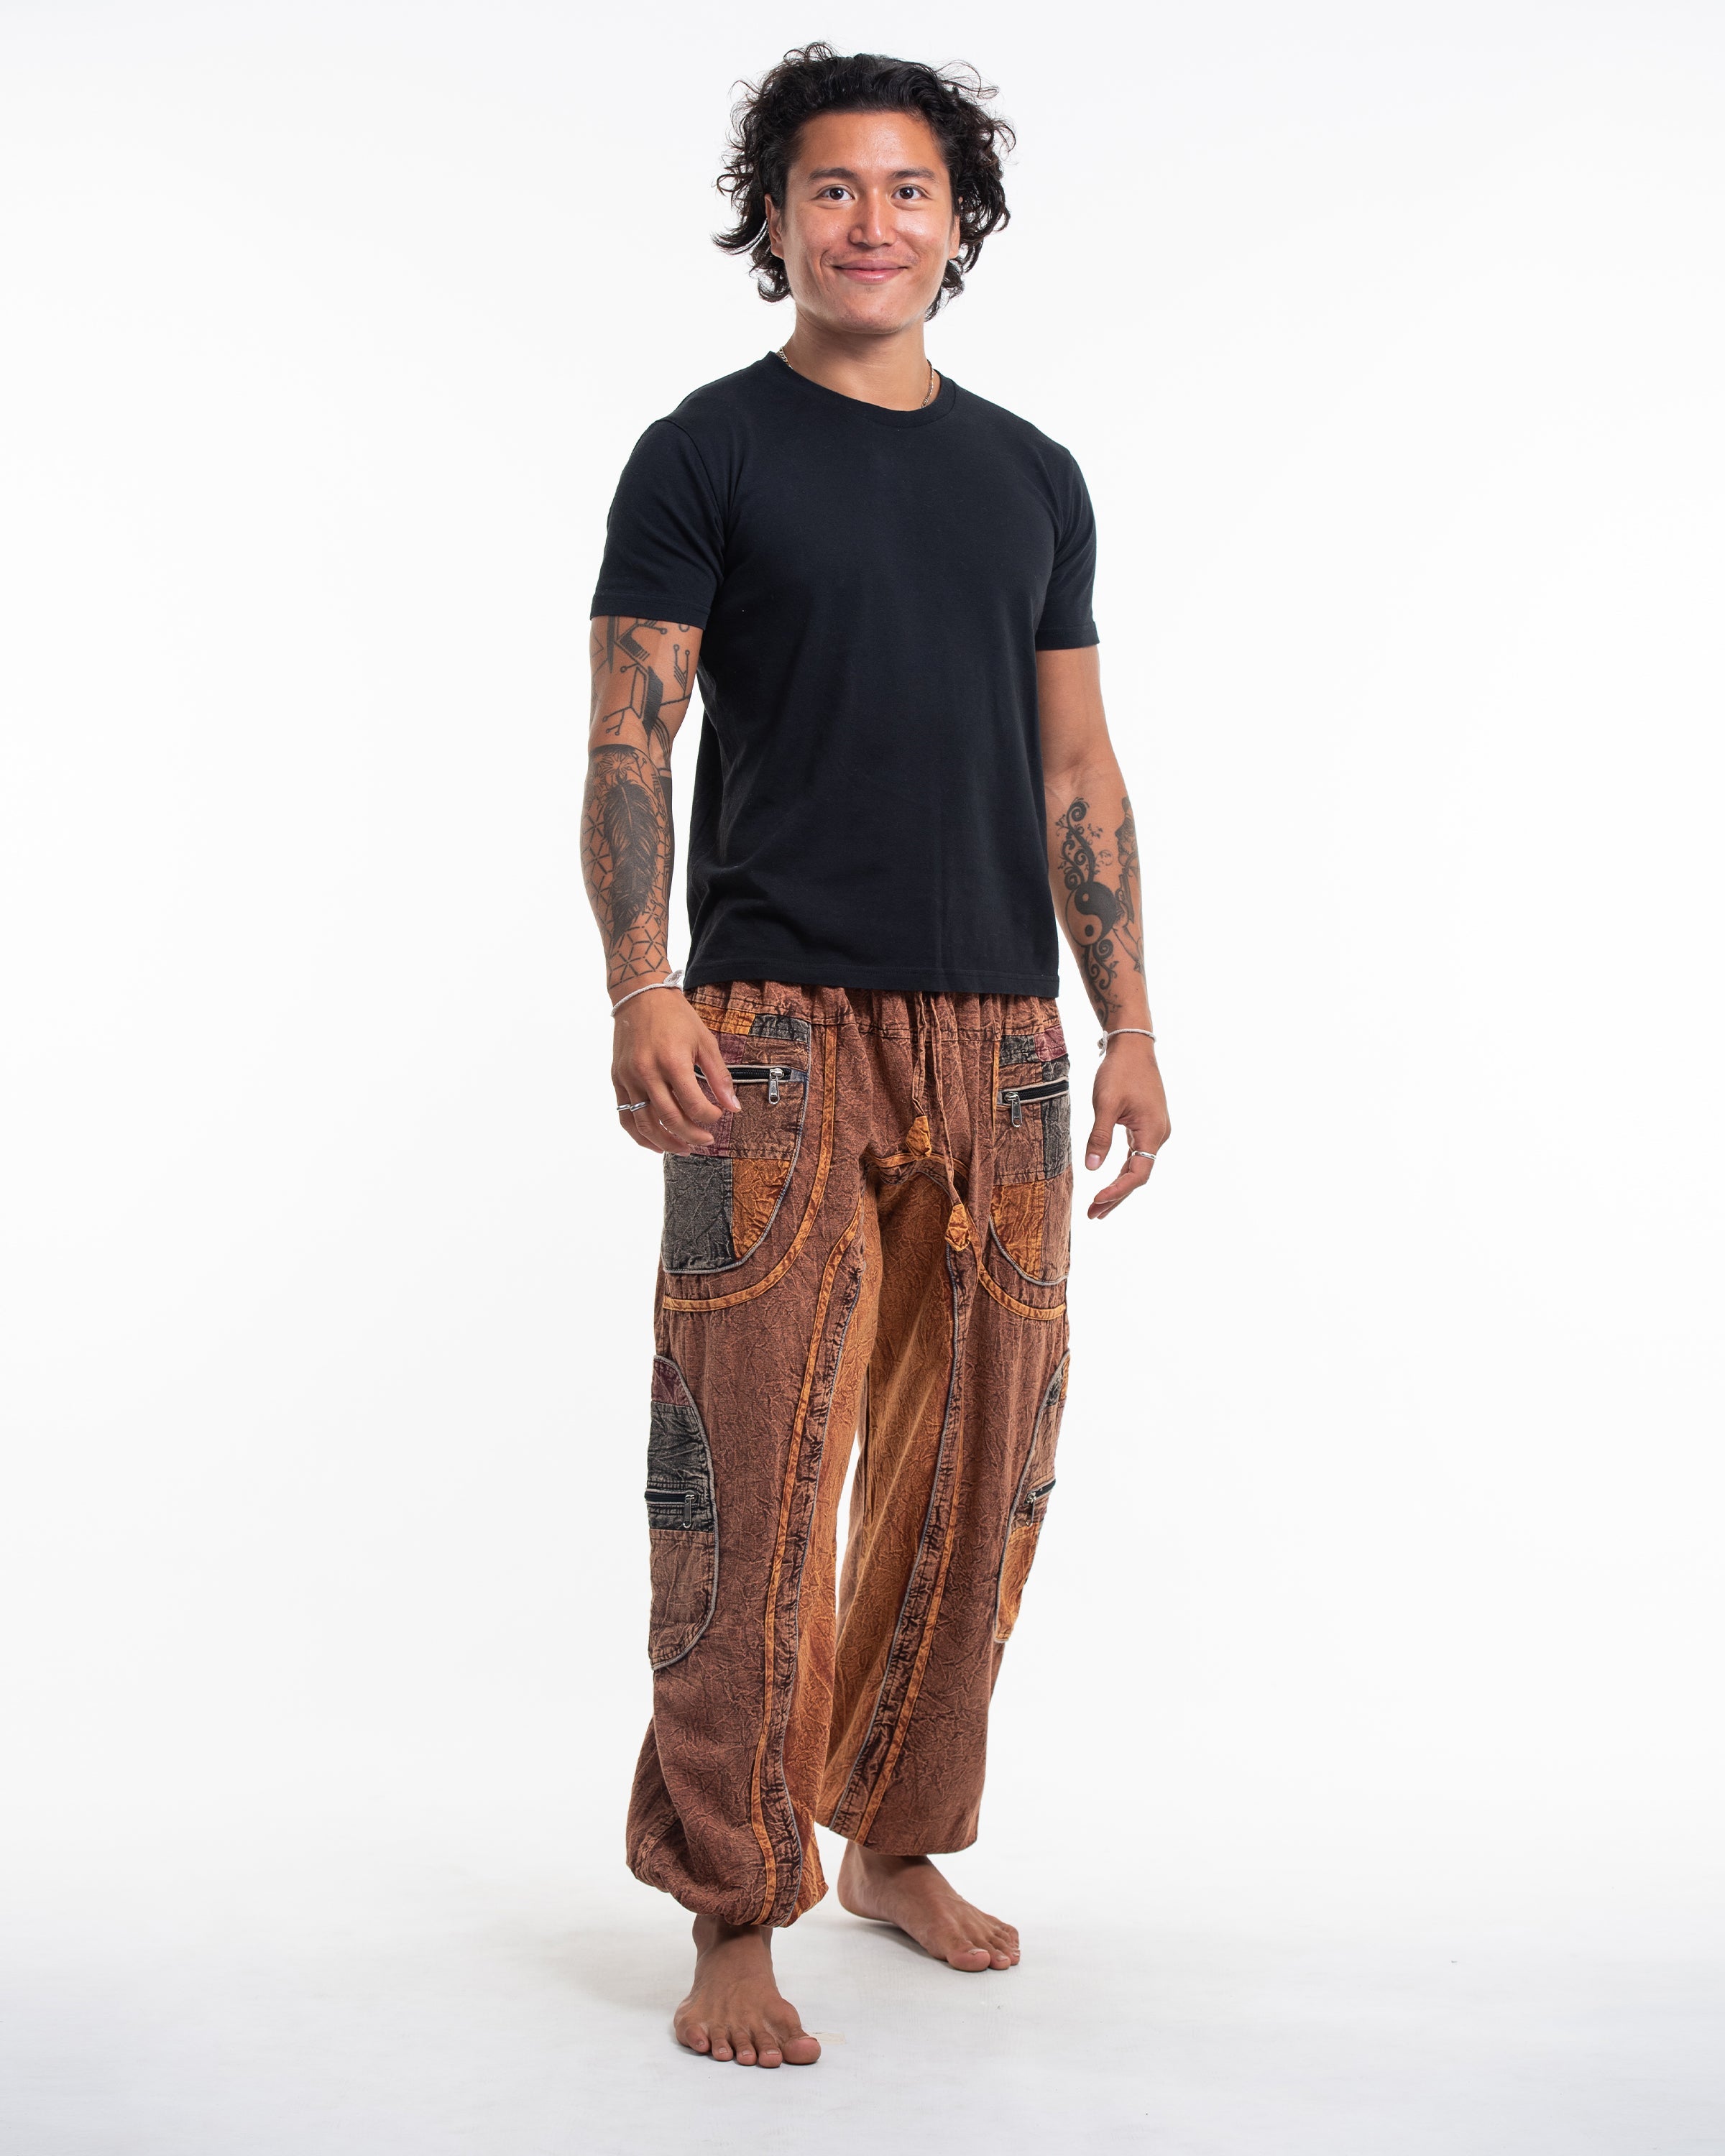 Indian Trousers Comfy Pants Travel with Pockets Pants yoga Pants Harem Pants  Loose Fit Wide at Rs 300/piece, हैरम पैंट्स in Jaipur